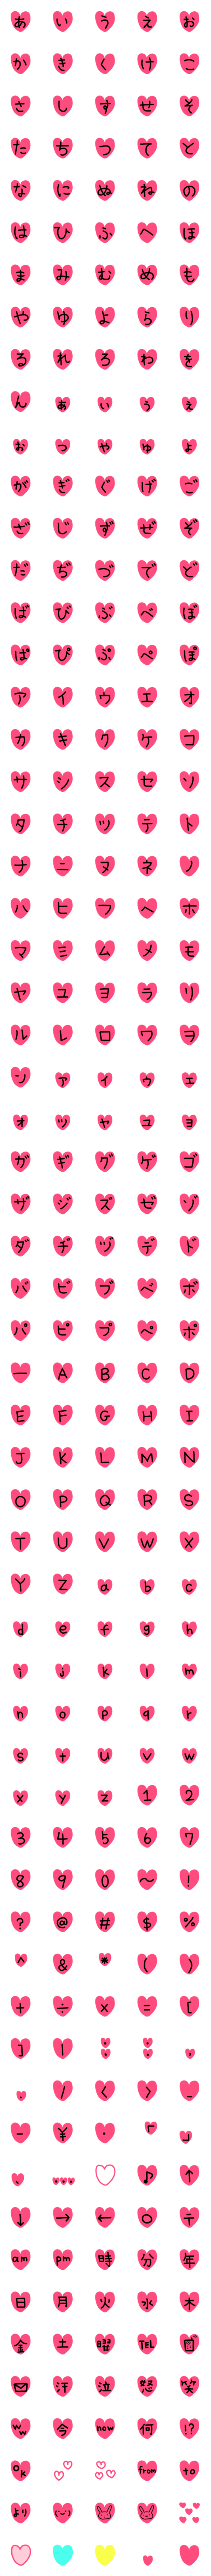 [LINE絵文字]♡ハート絵文字♡の画像一覧